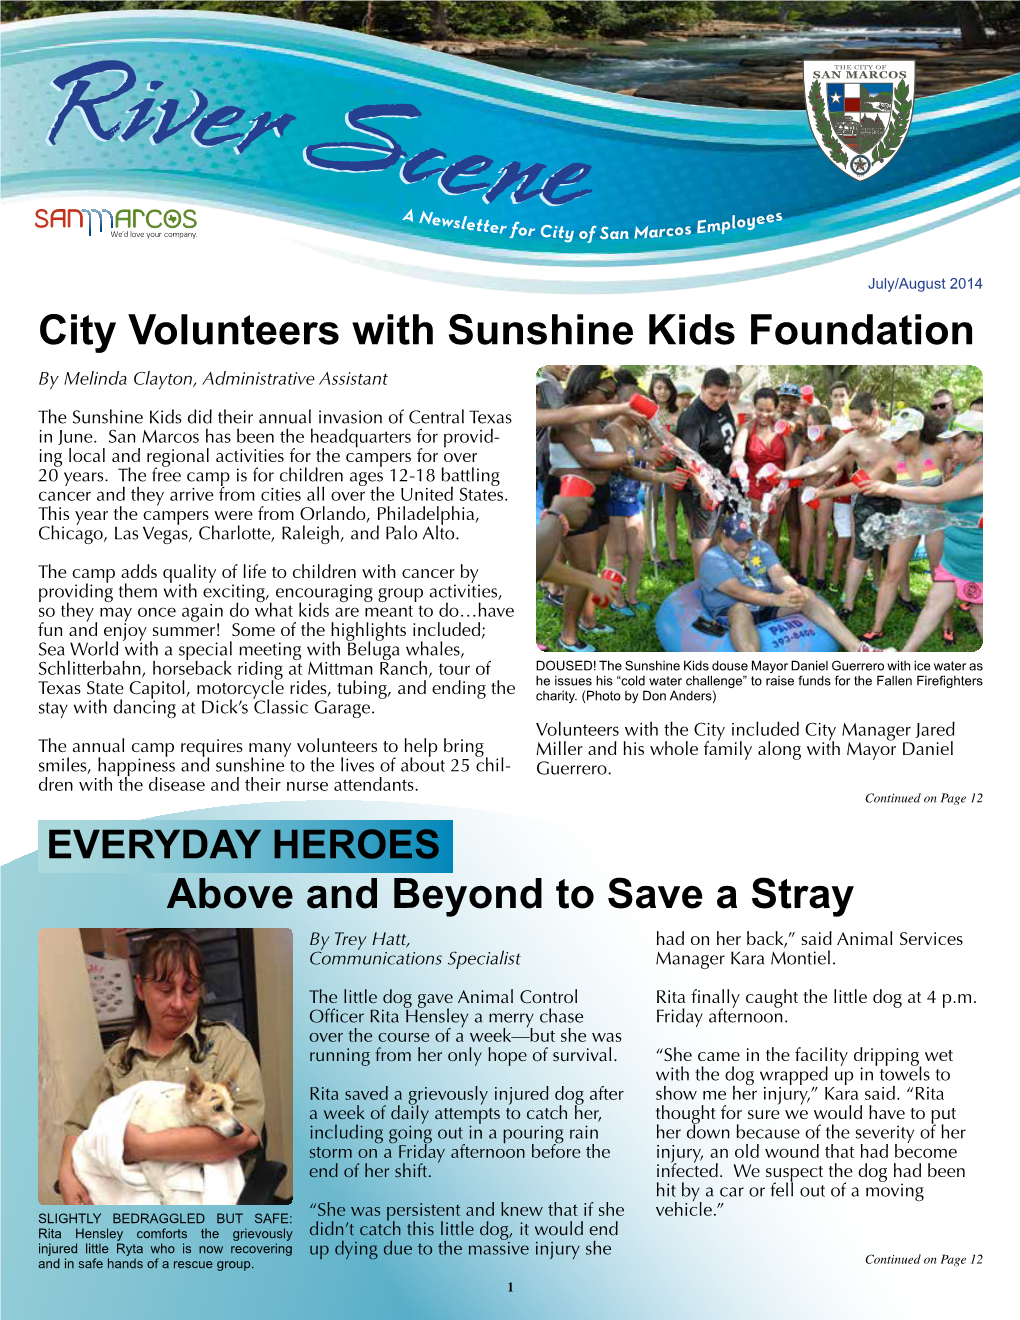 City Volunteers with Sunshine Kids Foundation Above and Beyond To